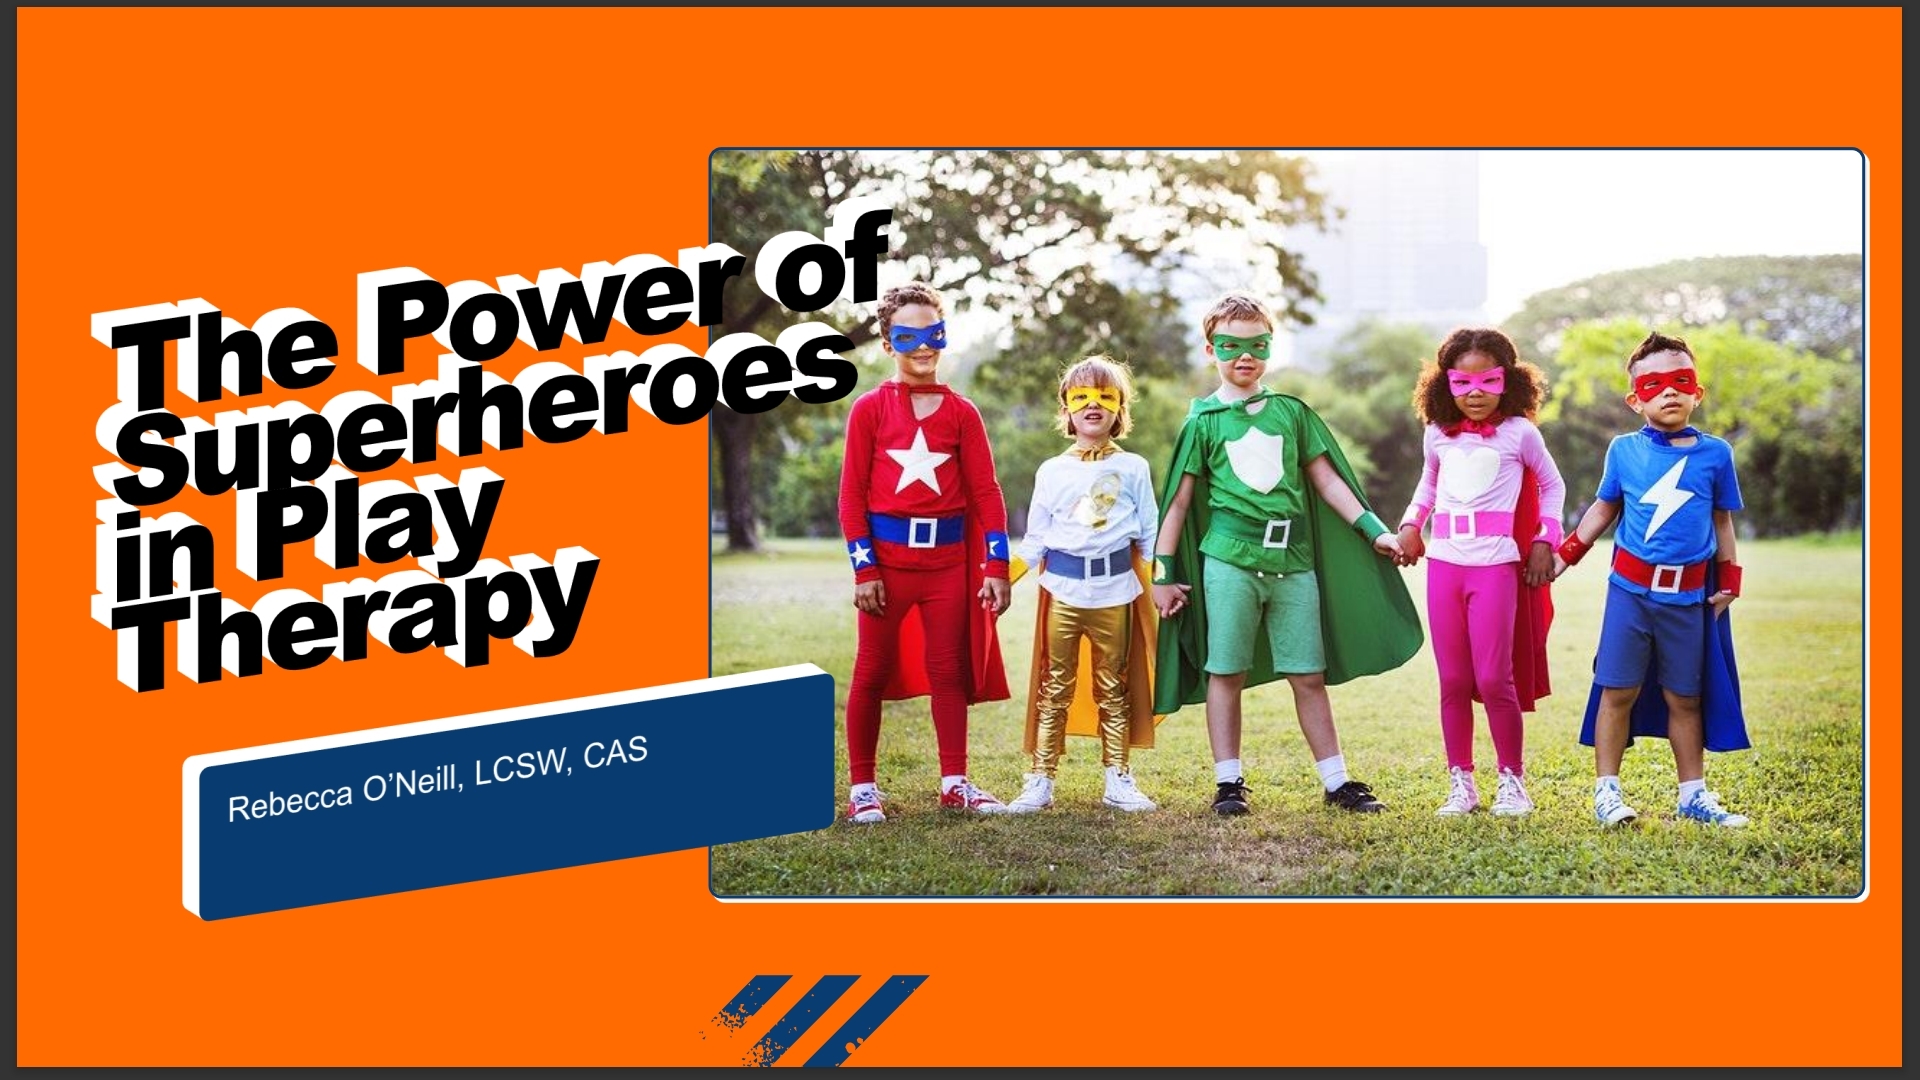 The Power of Superheroes in Play Therapy